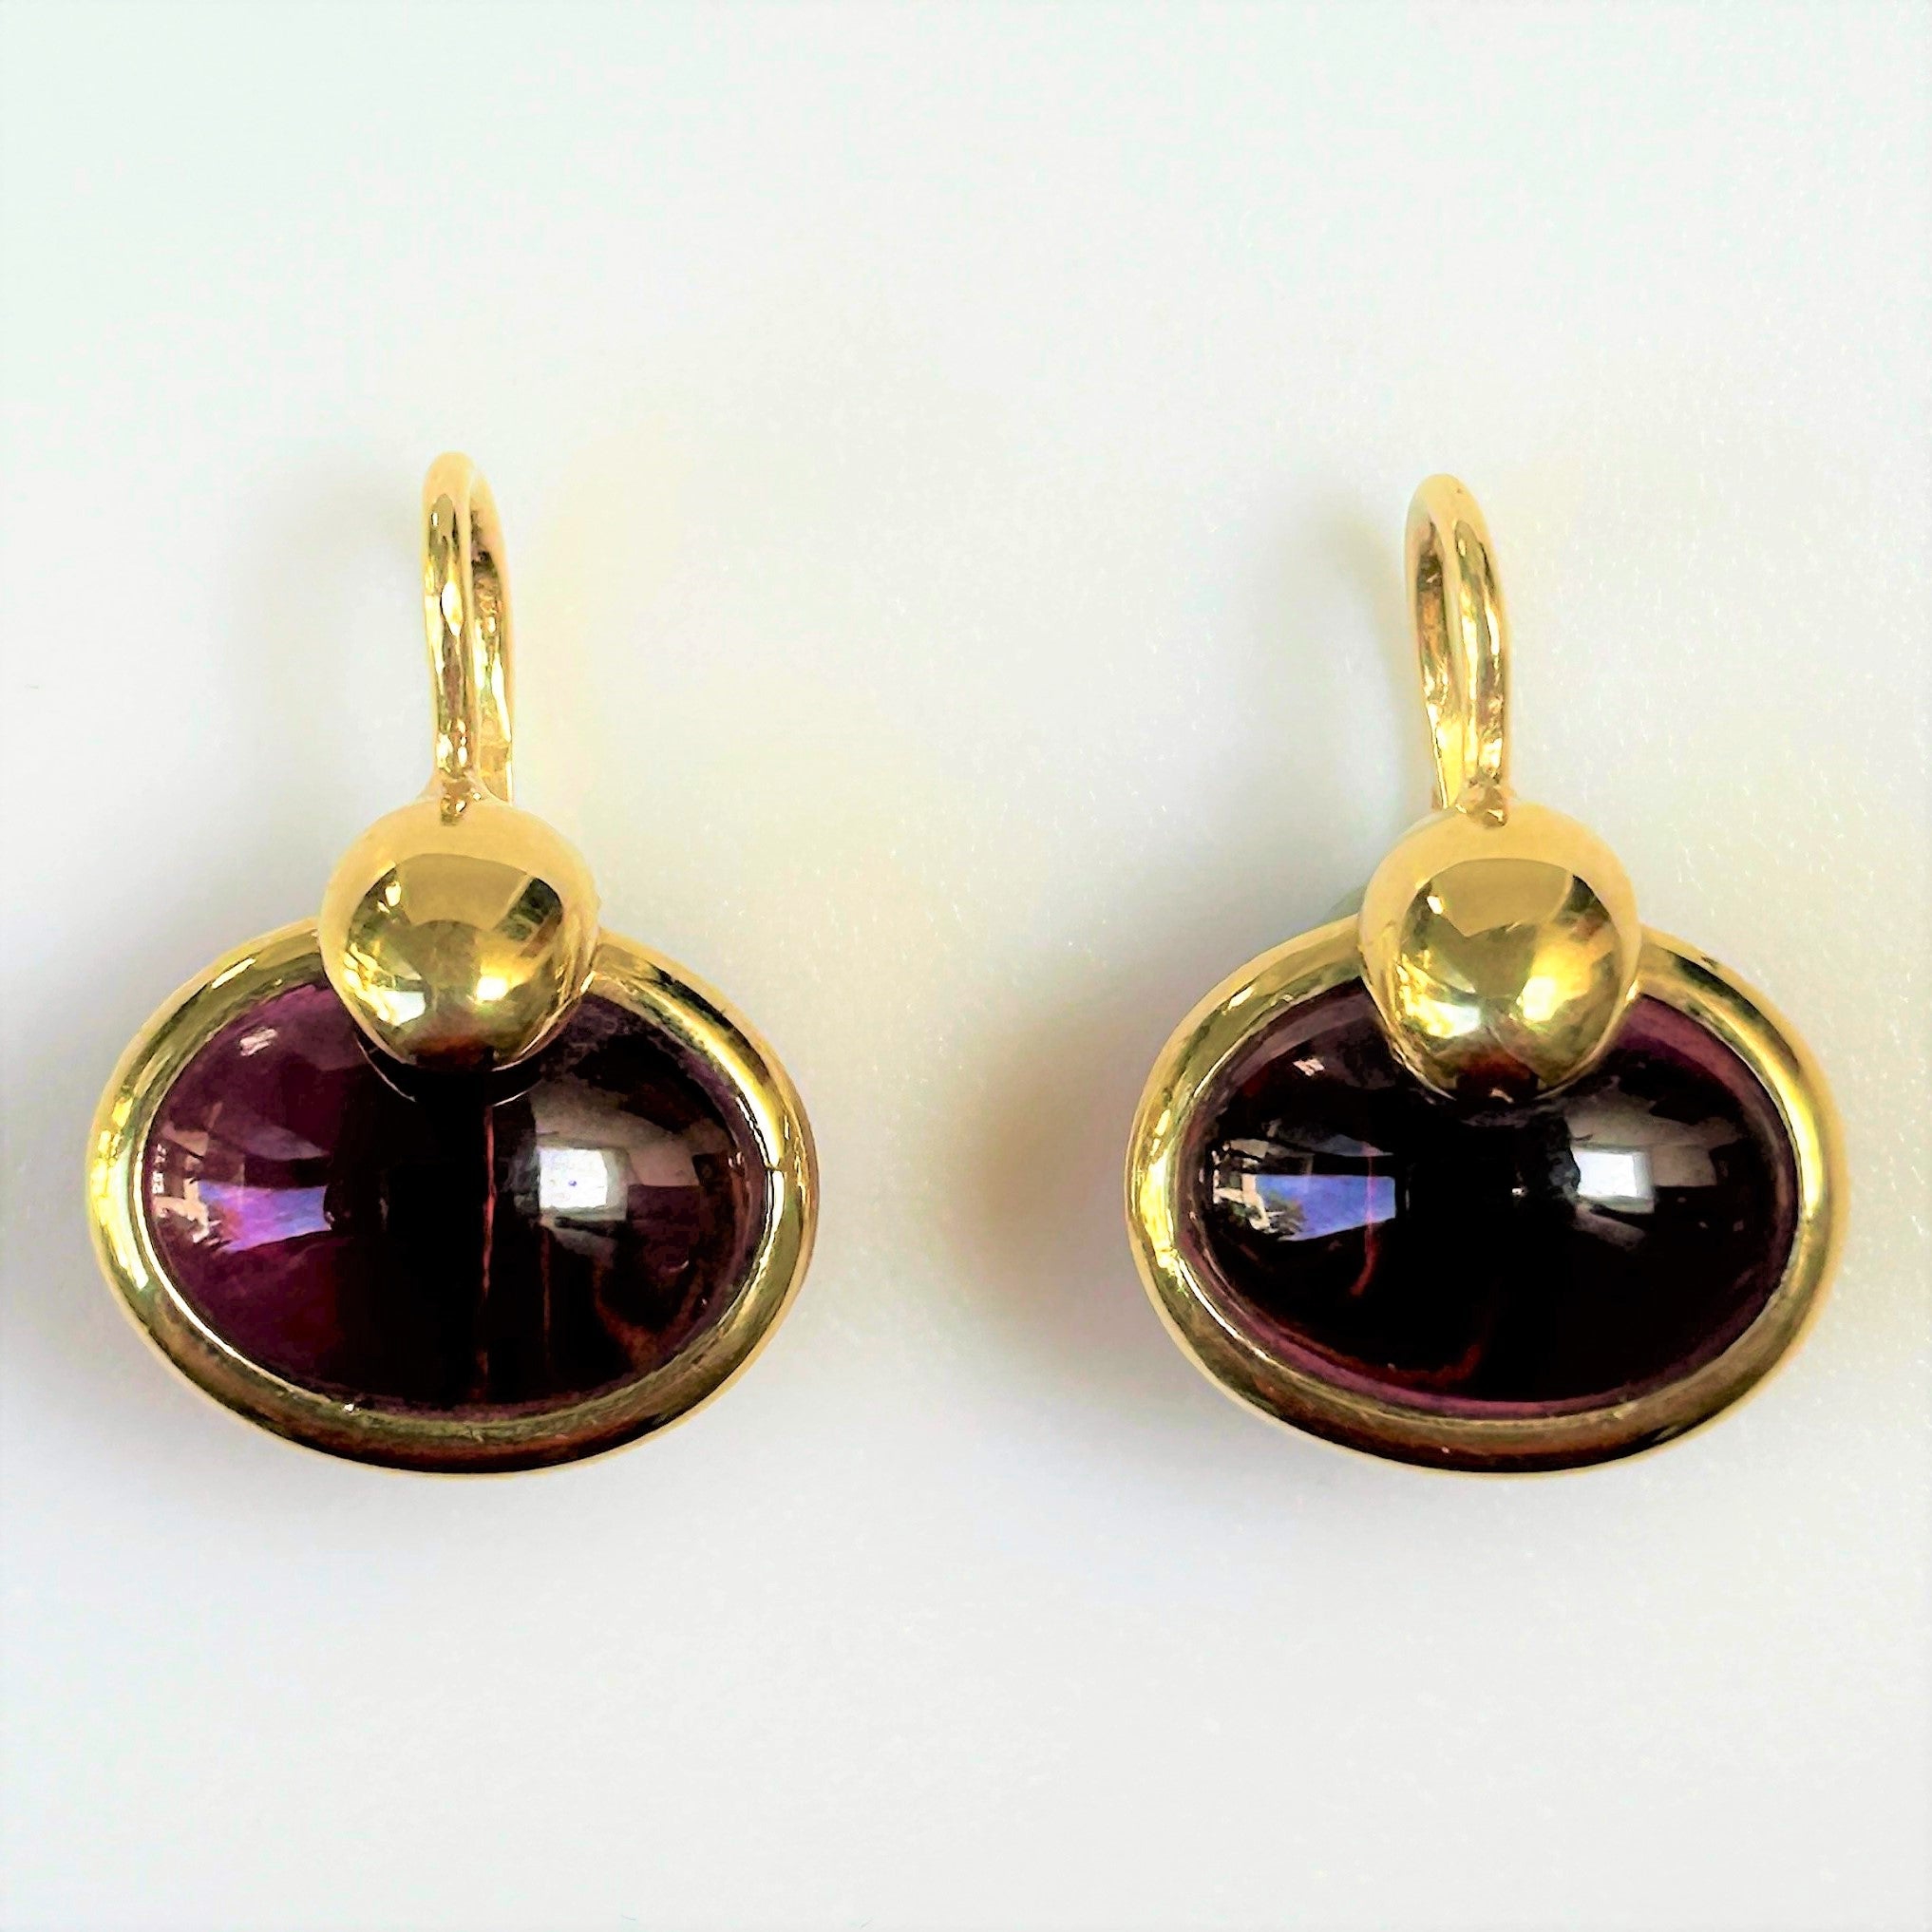 Mid-20th Century Gold and Garnet Drop Earrings